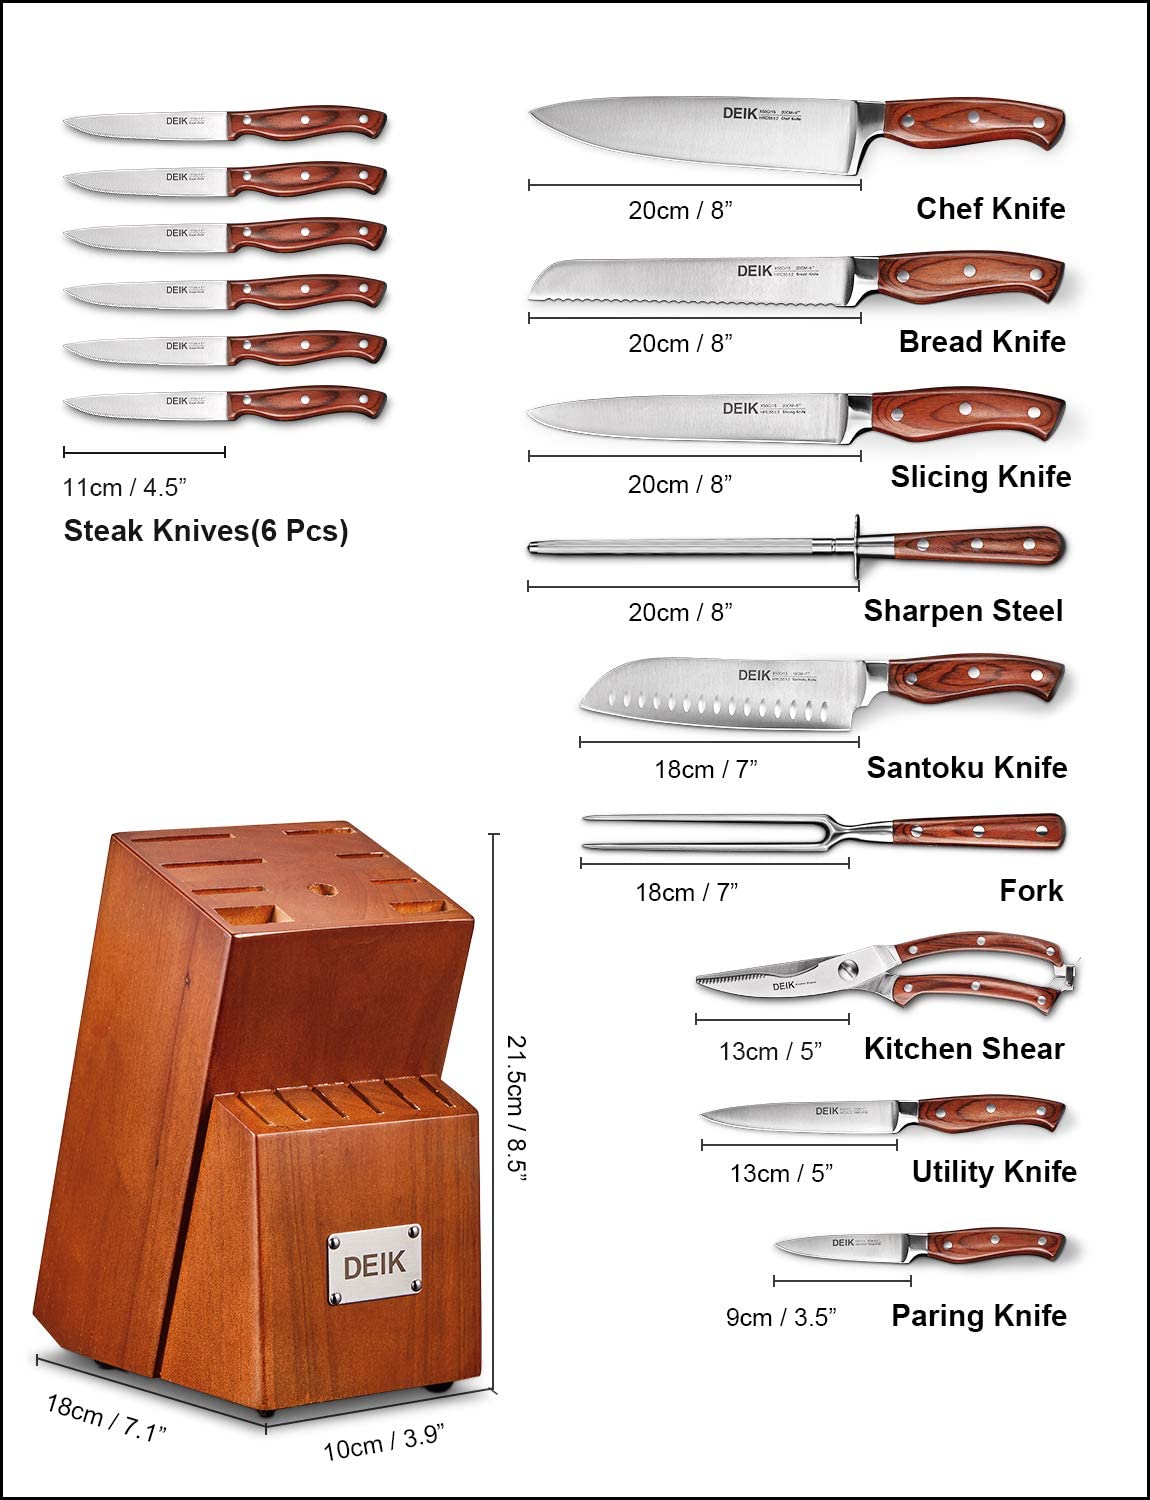 Deik | Knife Set, High Carbon Stainless Steel Kitchen Knife Set 16PCS, Super Sharp Cutlery Knife with Carving Fork and Serrated Steak Knives, Knife Tools Included